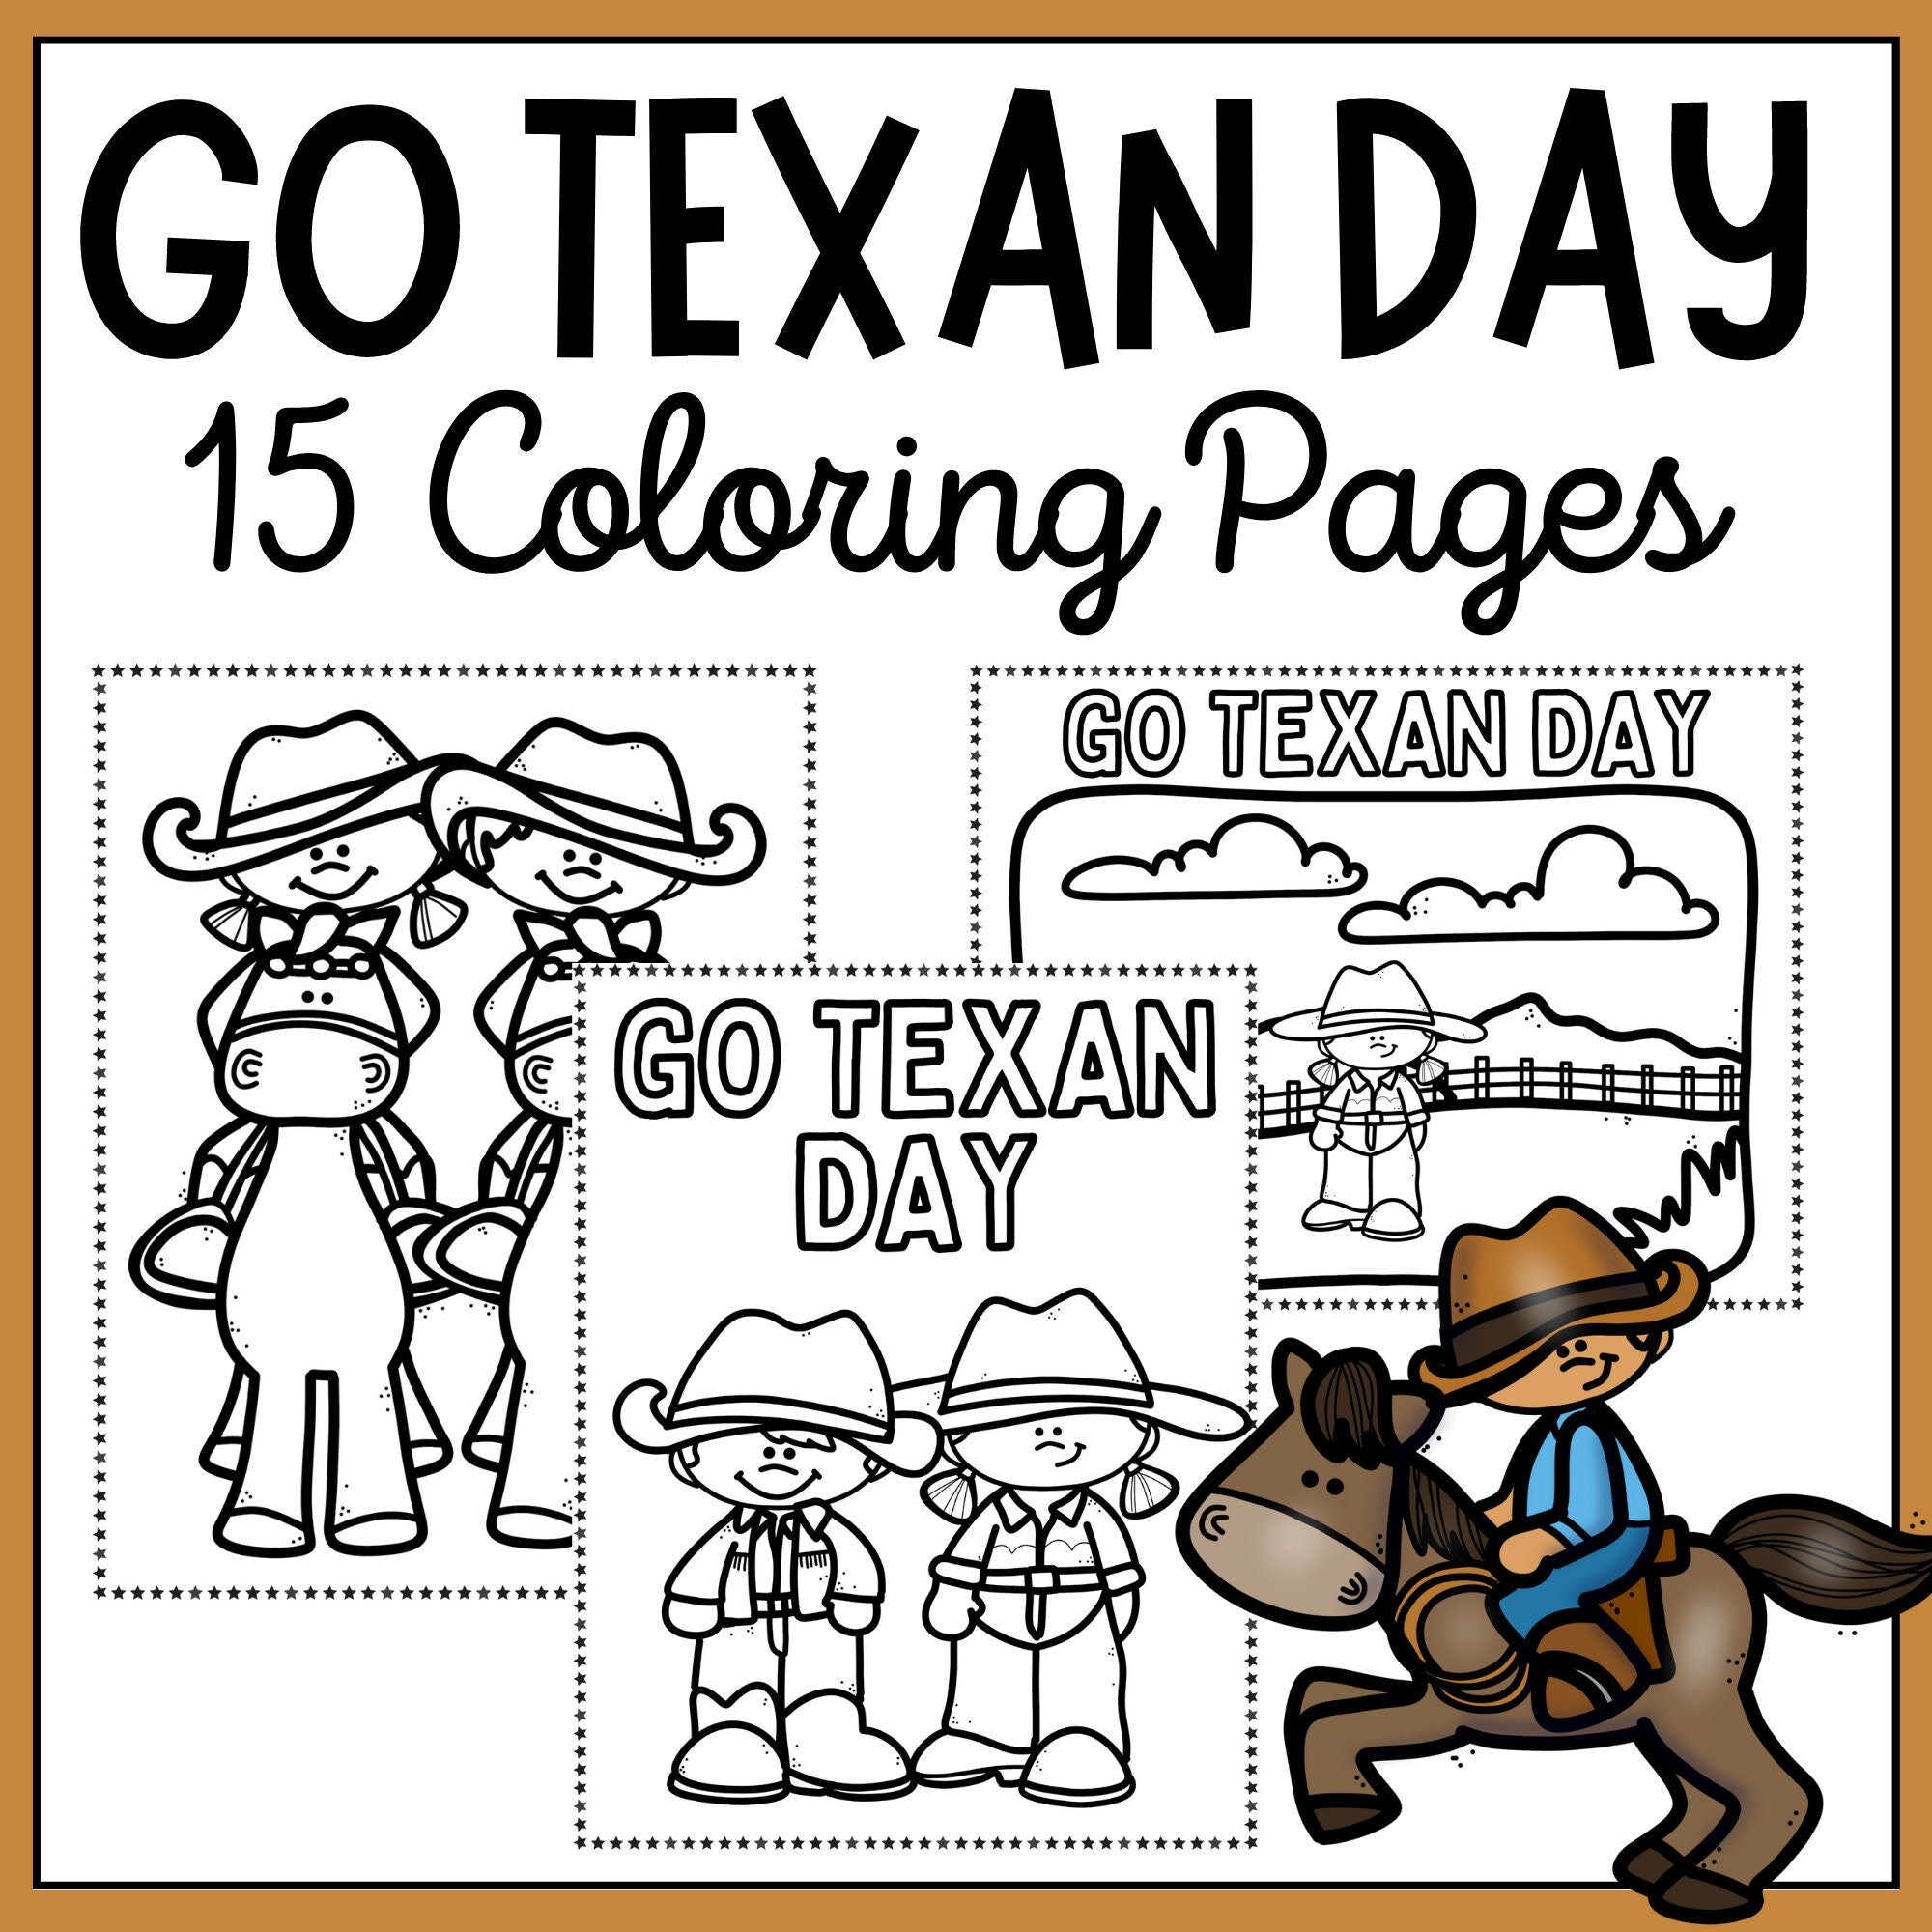 Go texan day coloring pages texas coloring sheets cowboy and western instant download and printable